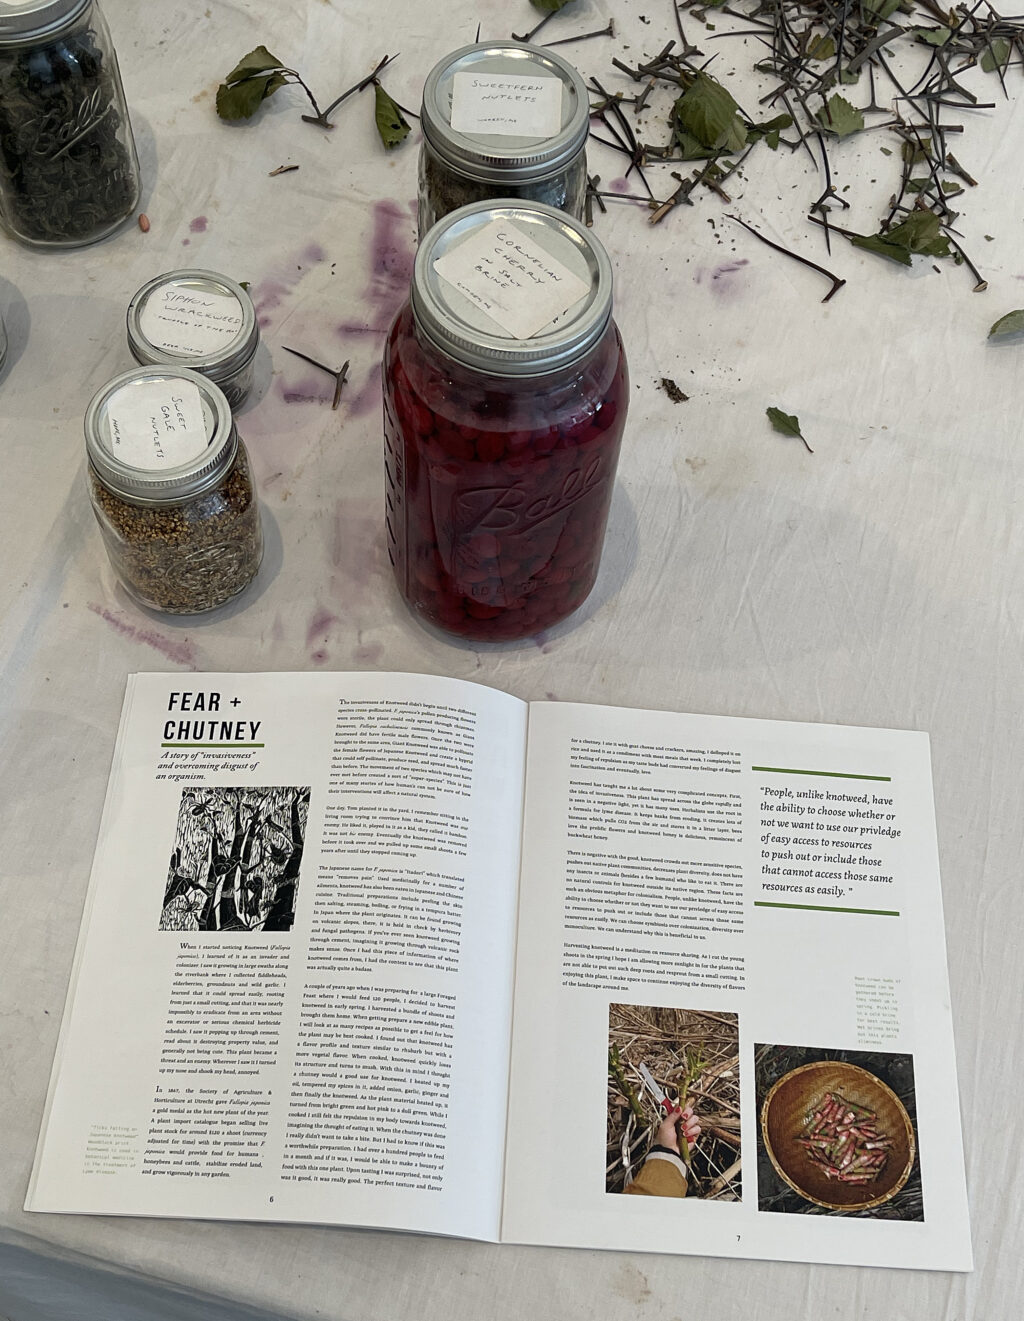 A photo of a table with foraged foods in jars and a book open that says "Fear and Chutney" by Rachel Alexandrou.